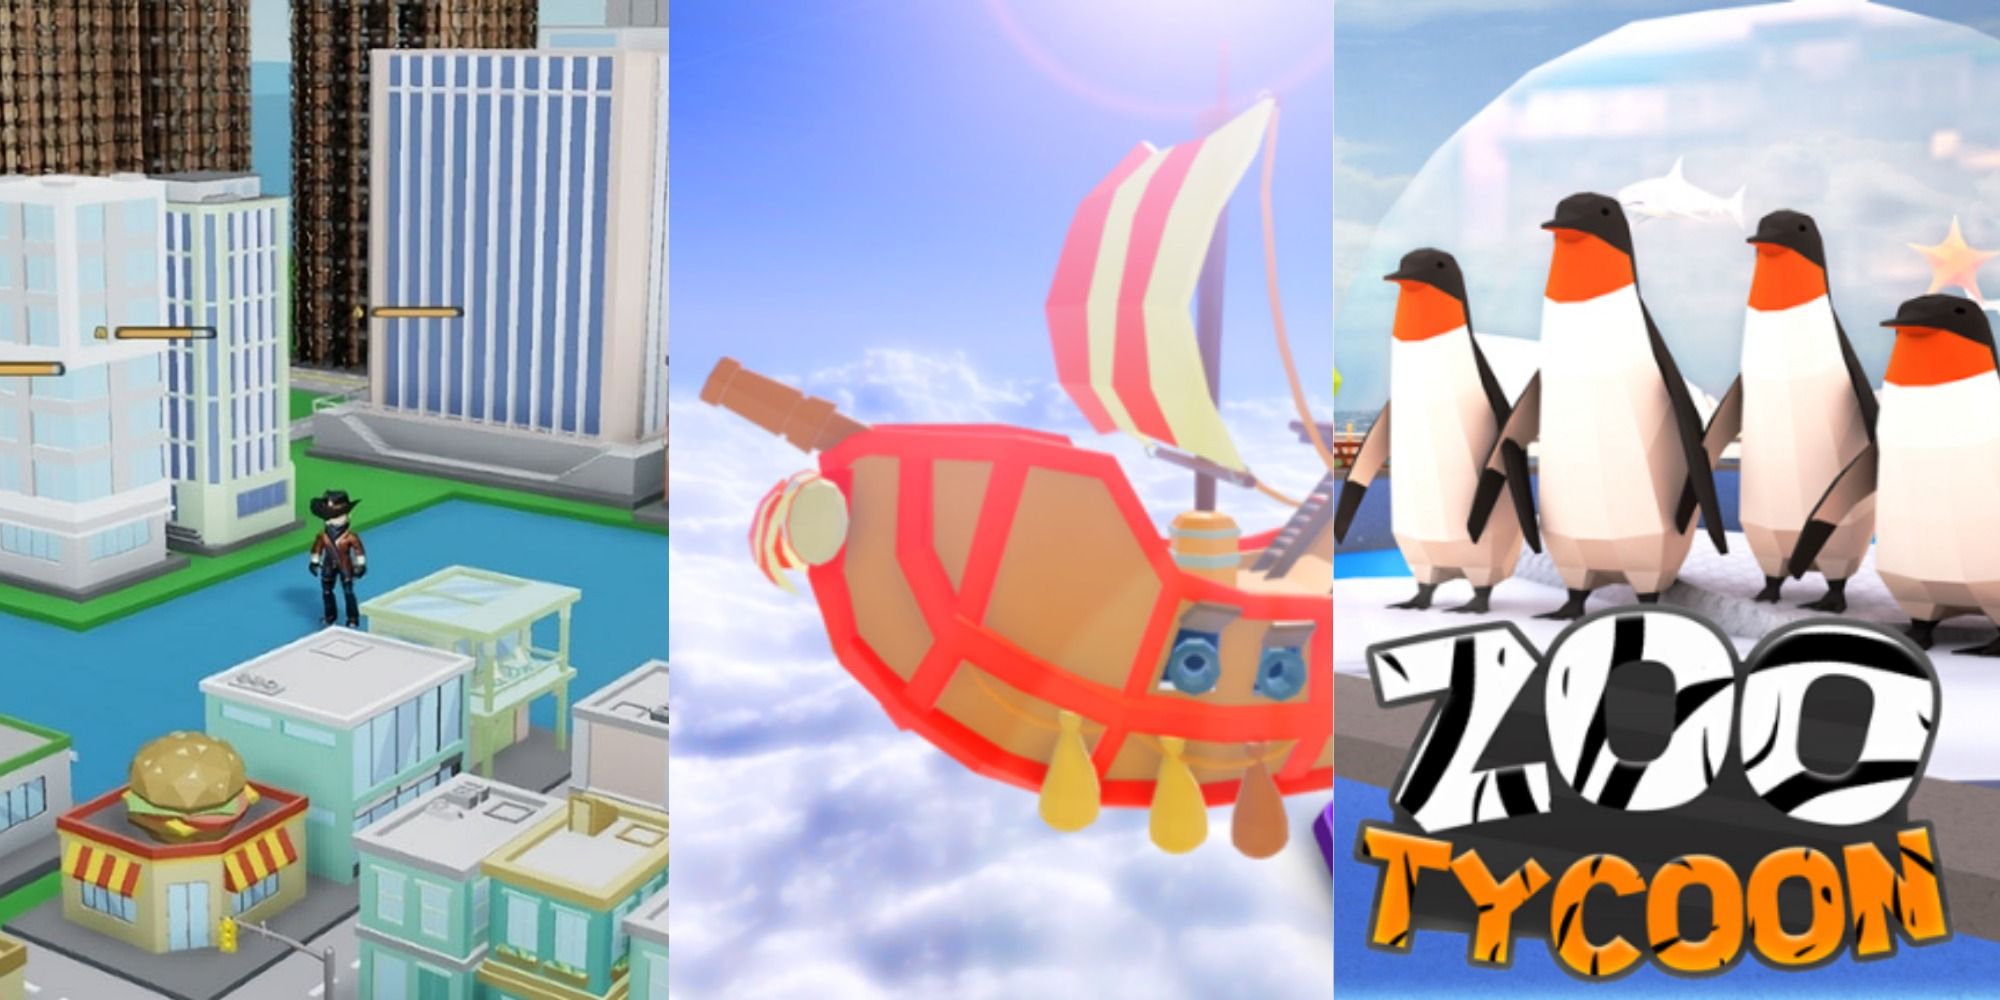 Split image Roblox screenshots from left to right: A Roblox character standing in a mini city, a ship in the clouds, and a group of penguins